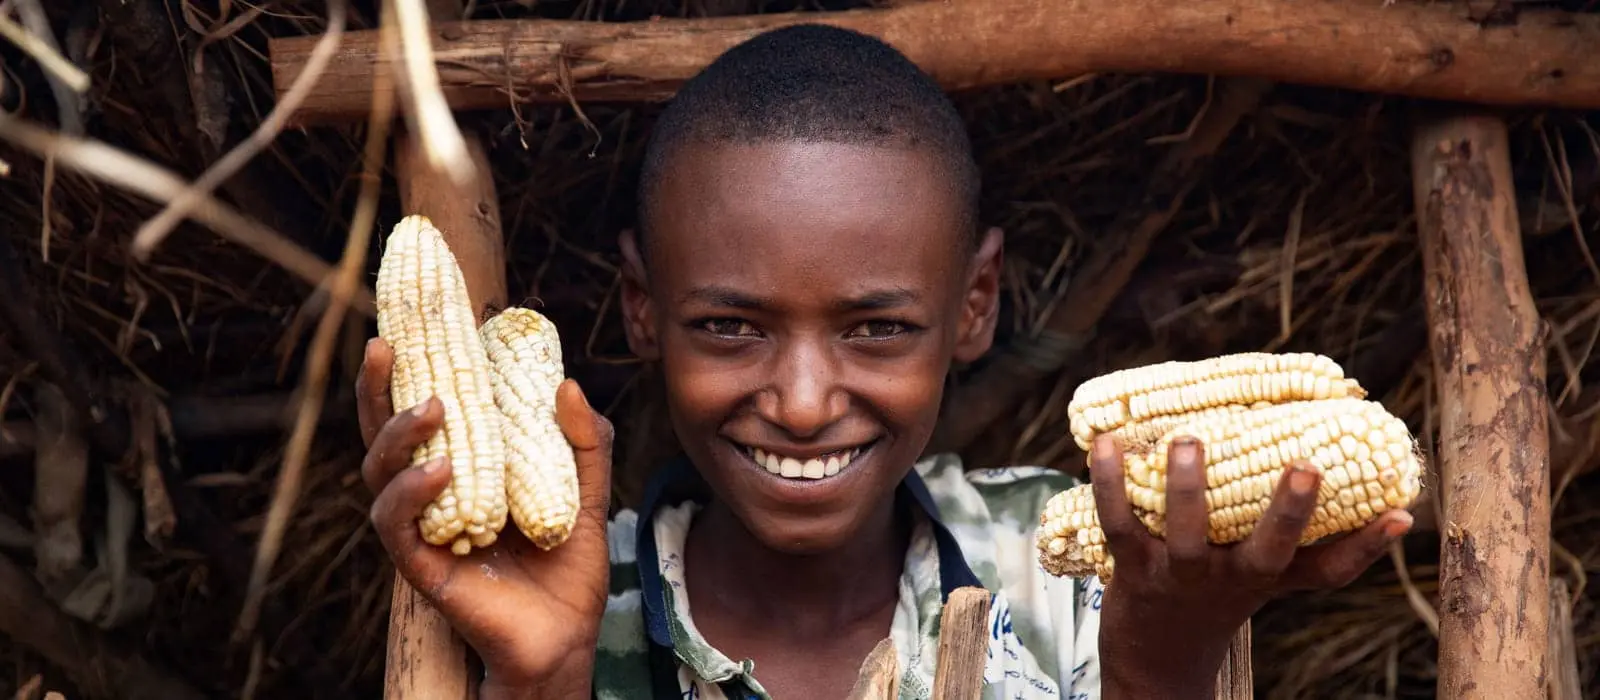 13 year old Abinet, retrieves maize cobs from the family store. His mother, Workinesh Alto, set up an agricultural trading business in the wake of taking part in REGRADE, a graduation-based program run by Concern in SNNPR, Ethiopia.